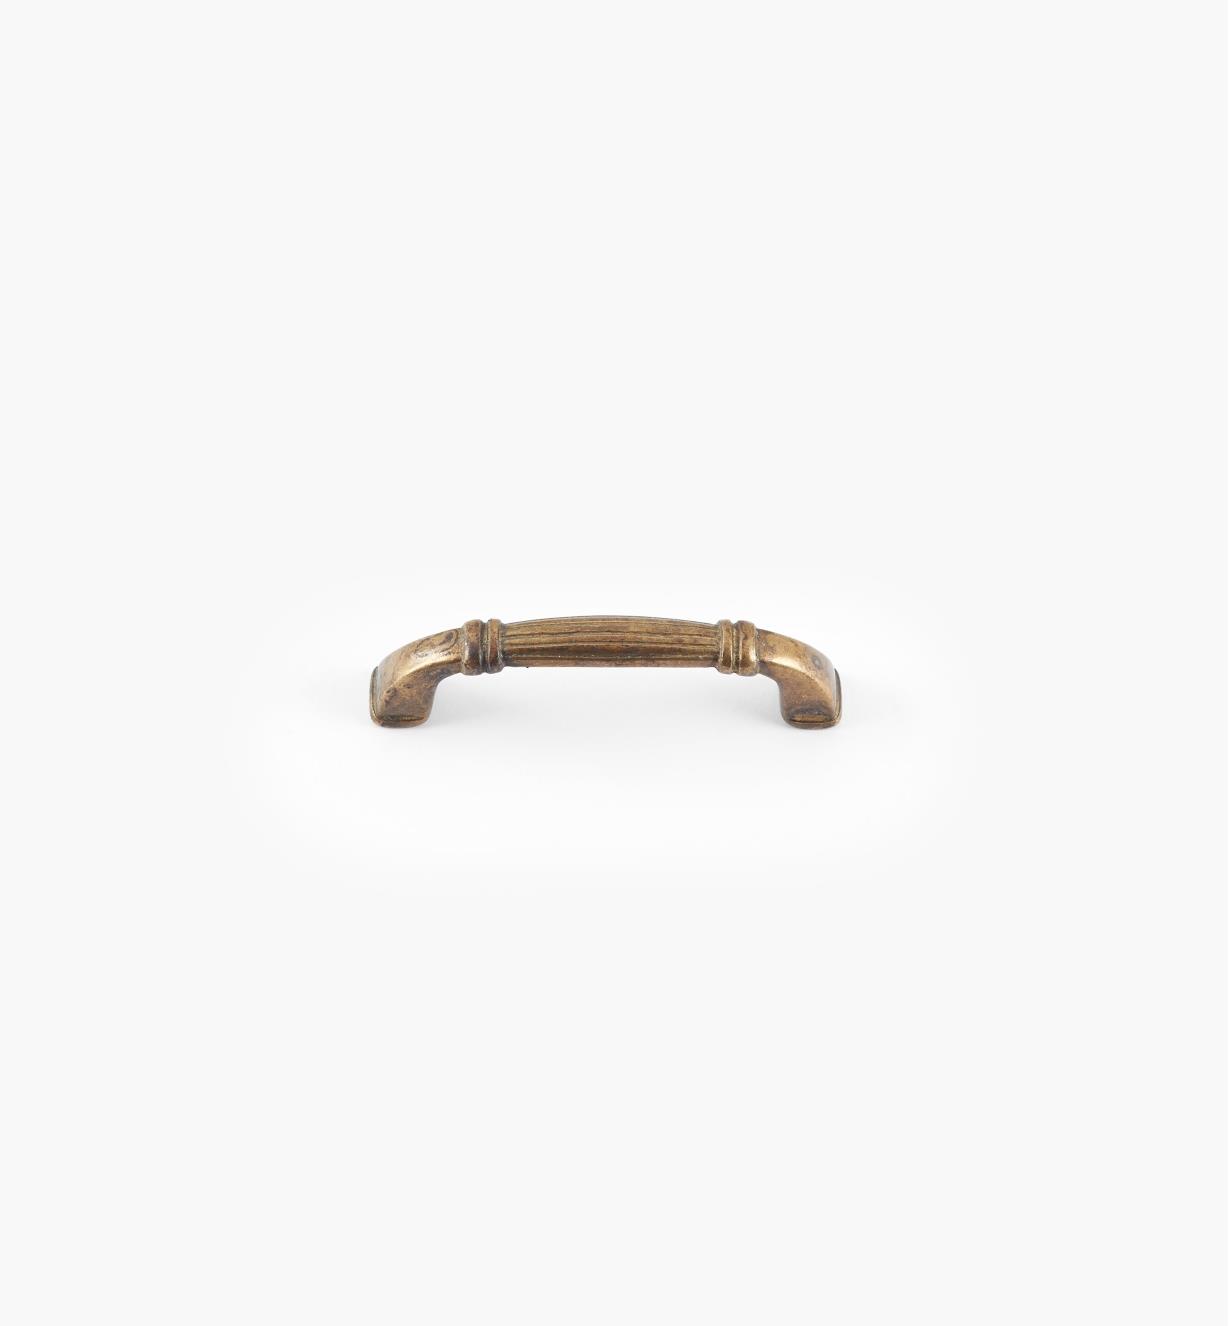 00A7055 - 64mm Old Brass Handle